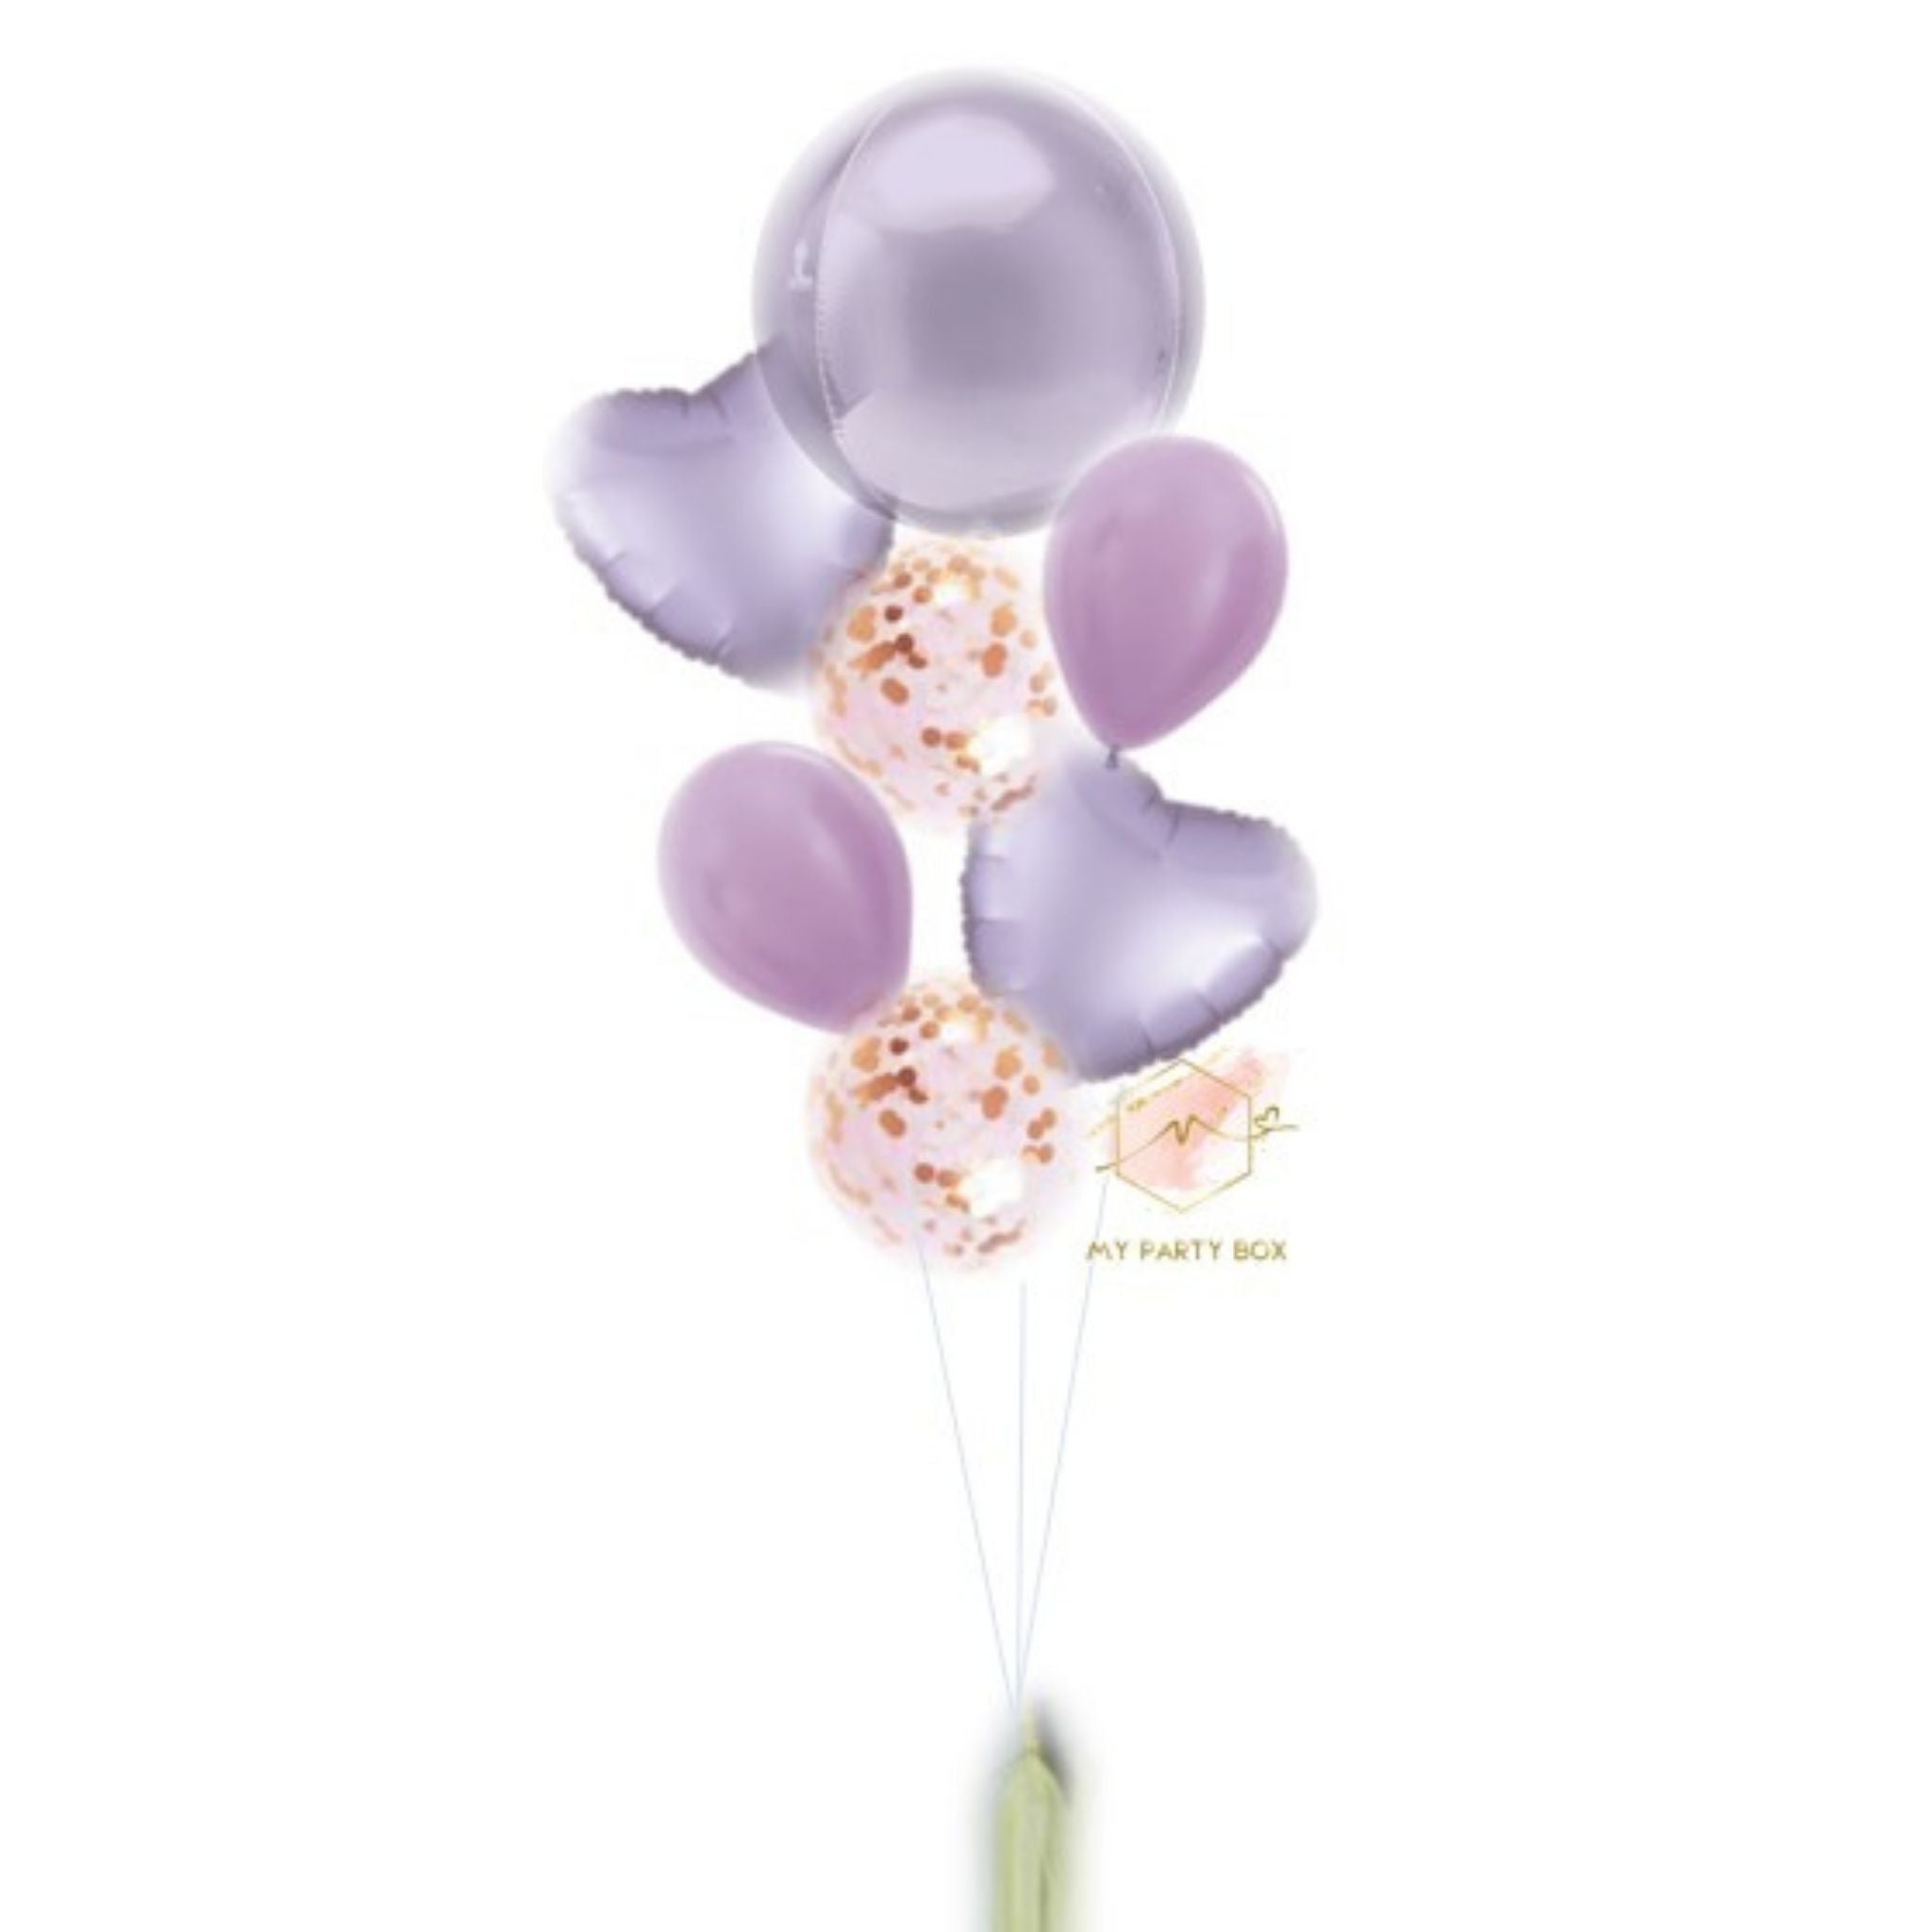 My Party Box Pastel Purple Deluxe Balloon Bouquet